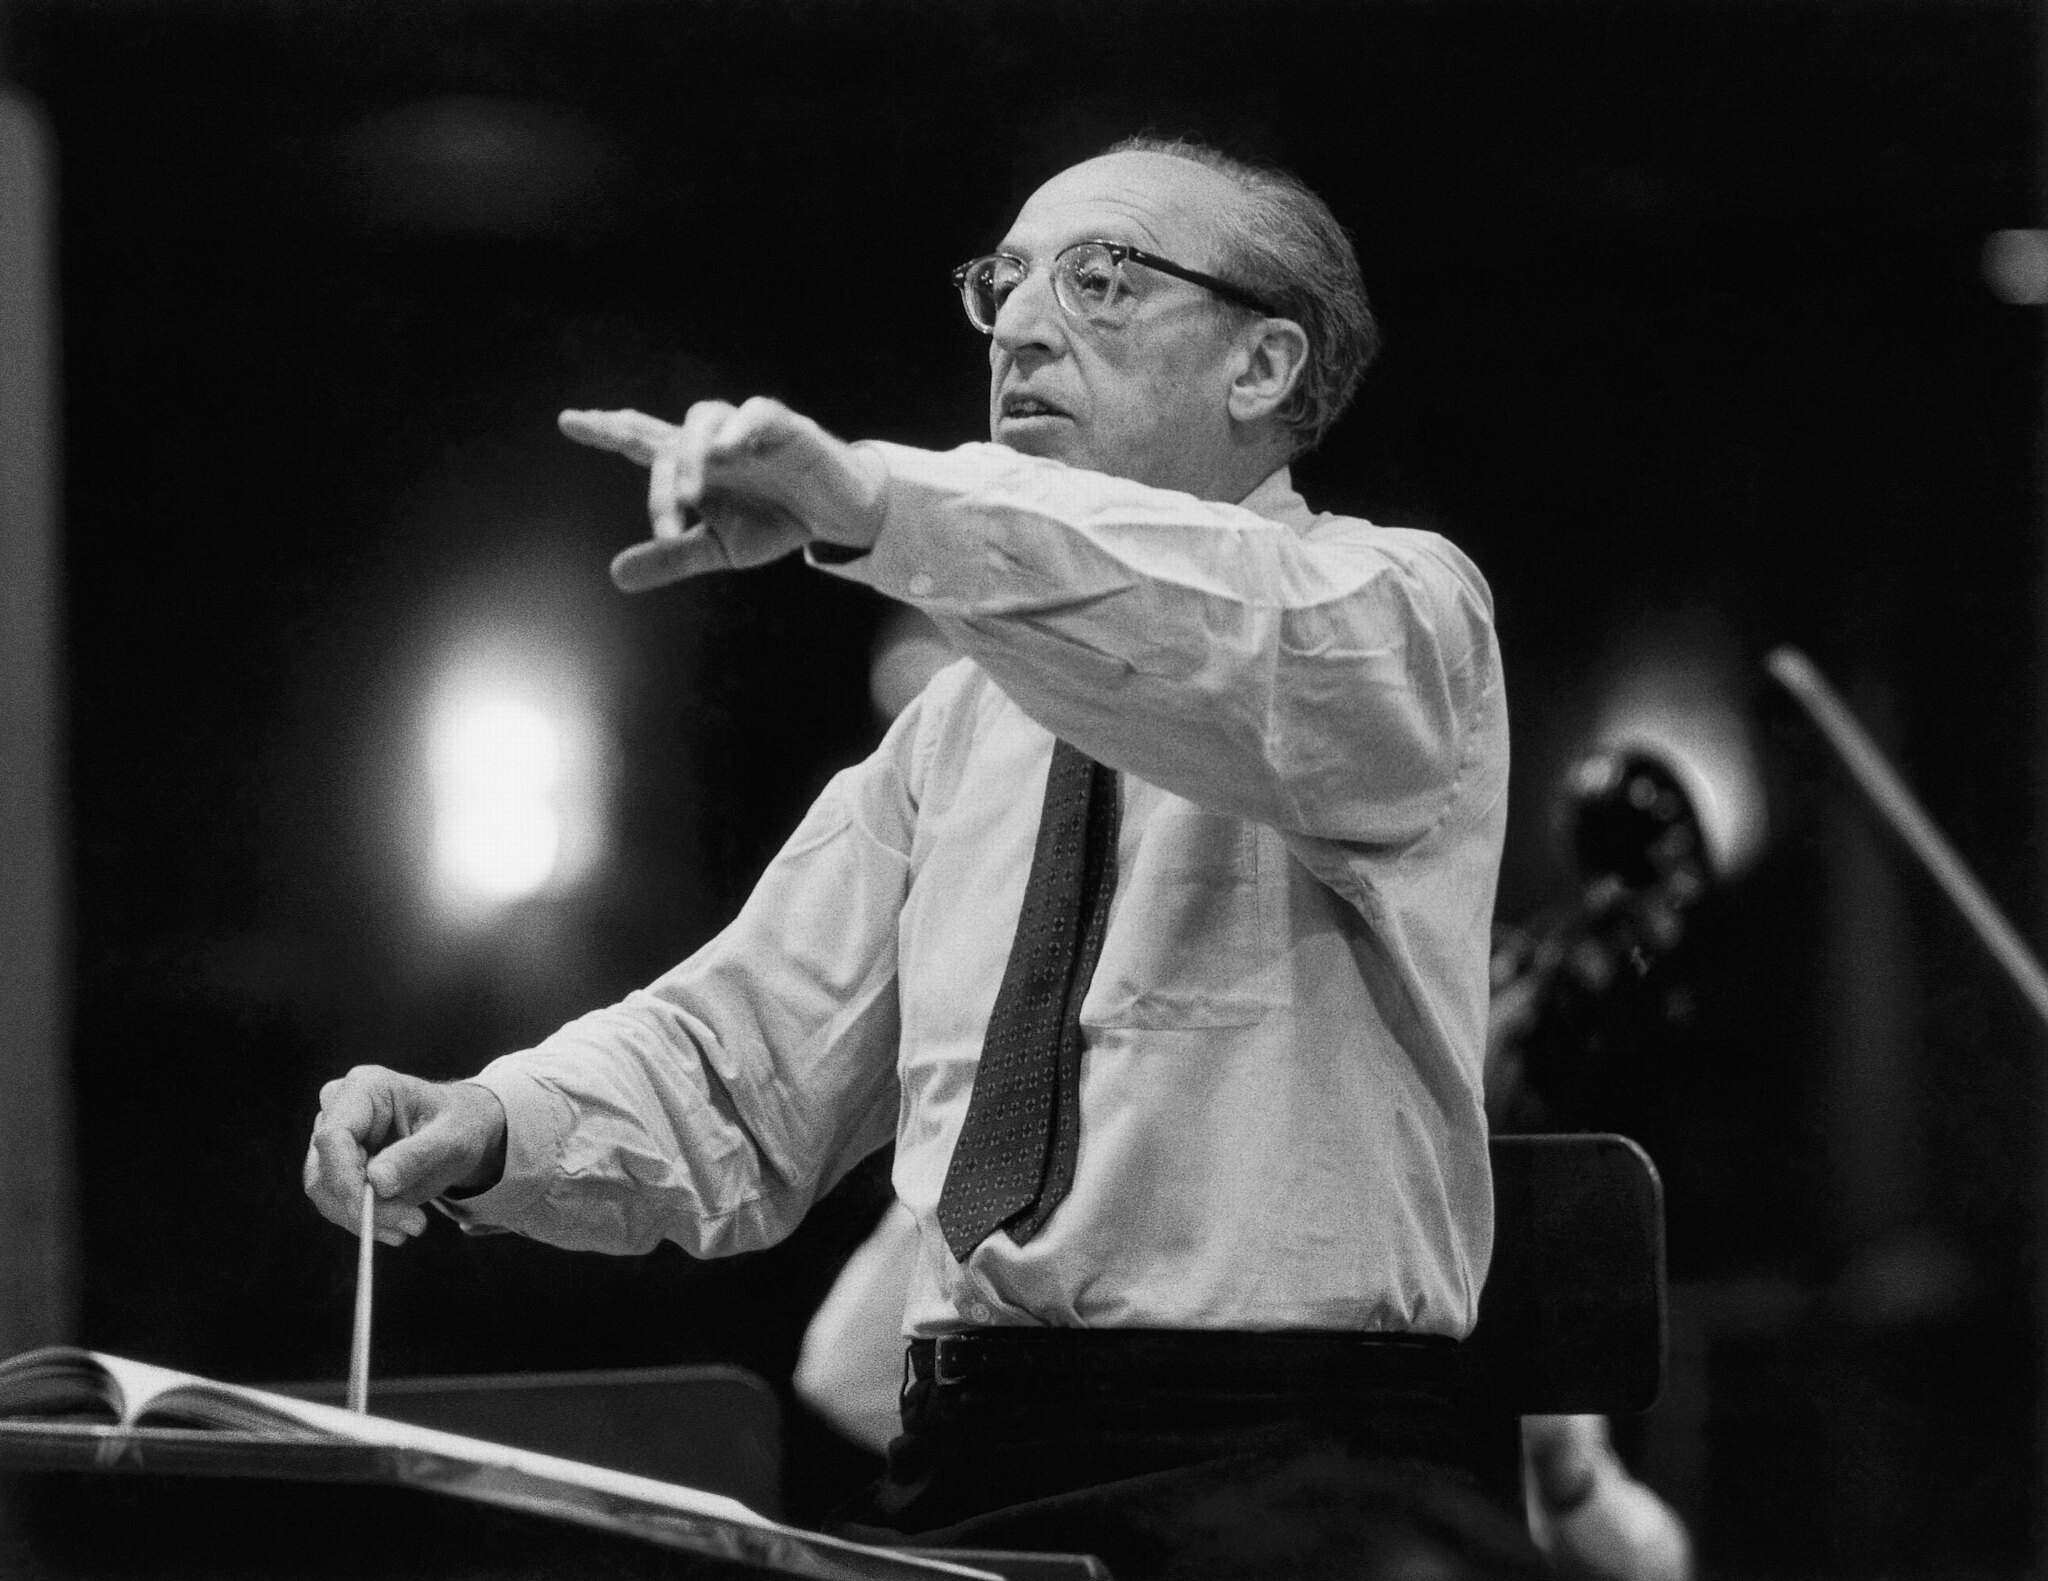 A black and white image of Aaron Copland conducting